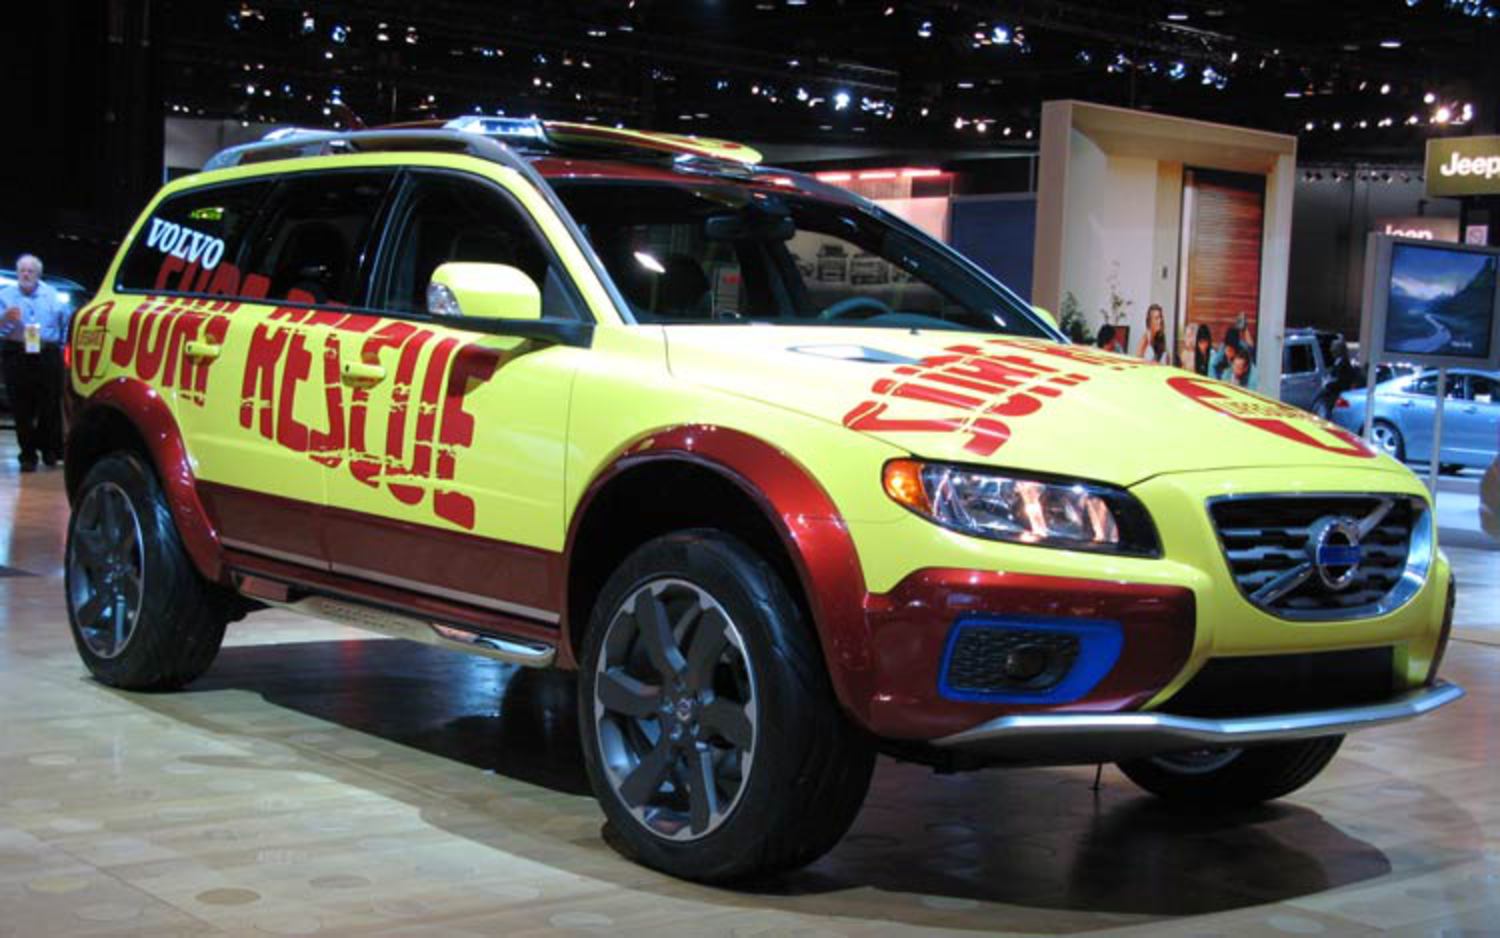 Volvo XC70 Cross Country Surf and Rescue